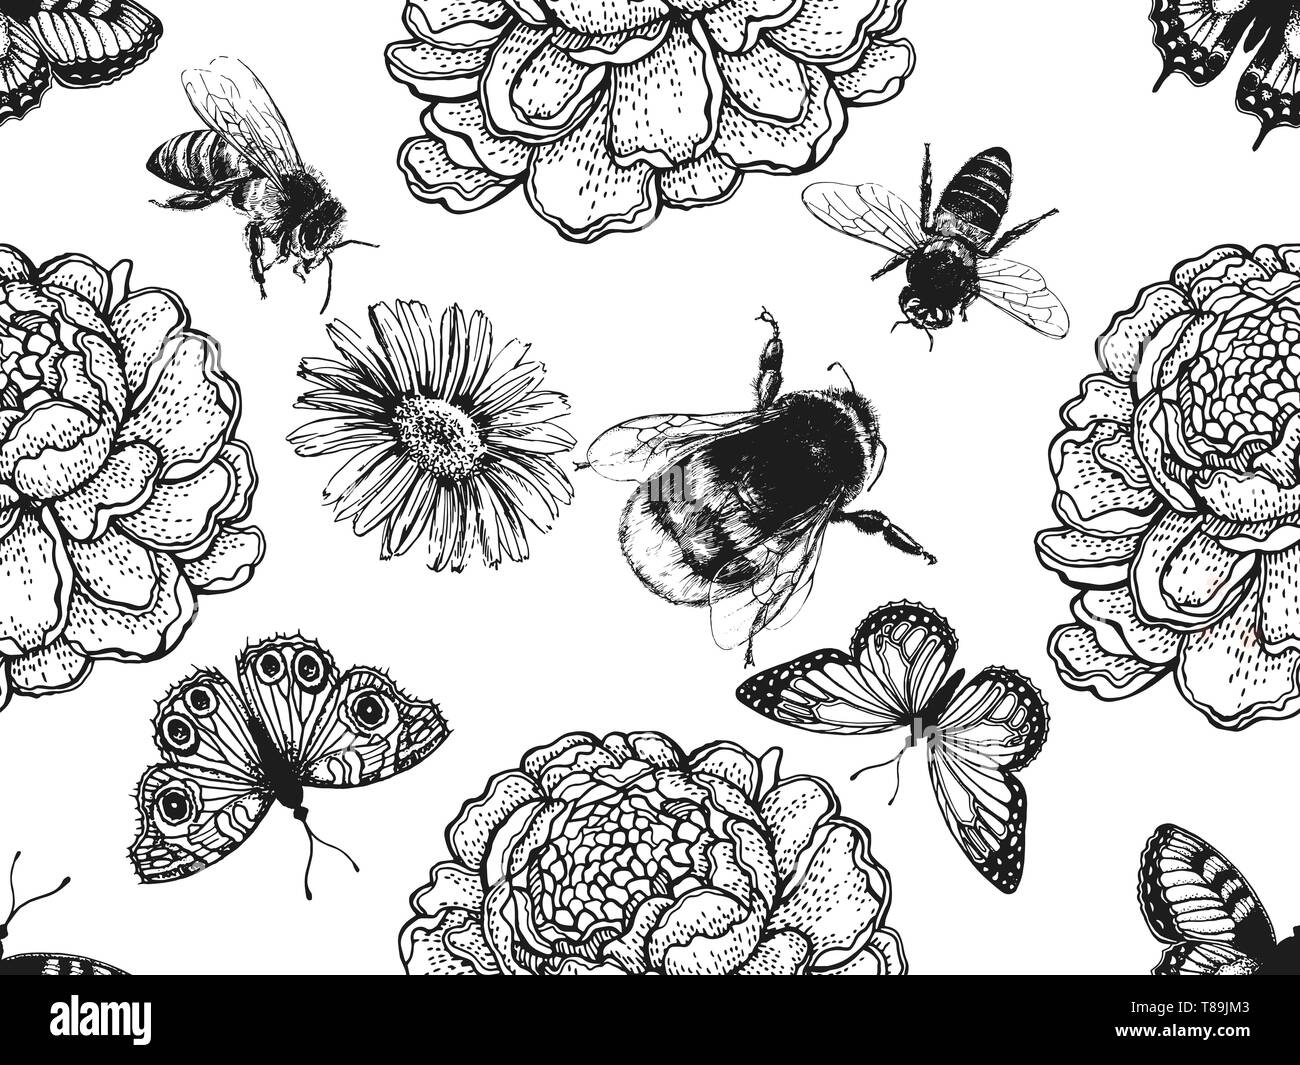 Seamless pattern of hand drawn sketch style insects and flowers isolated on white background. Vector illustration. Stock Vector